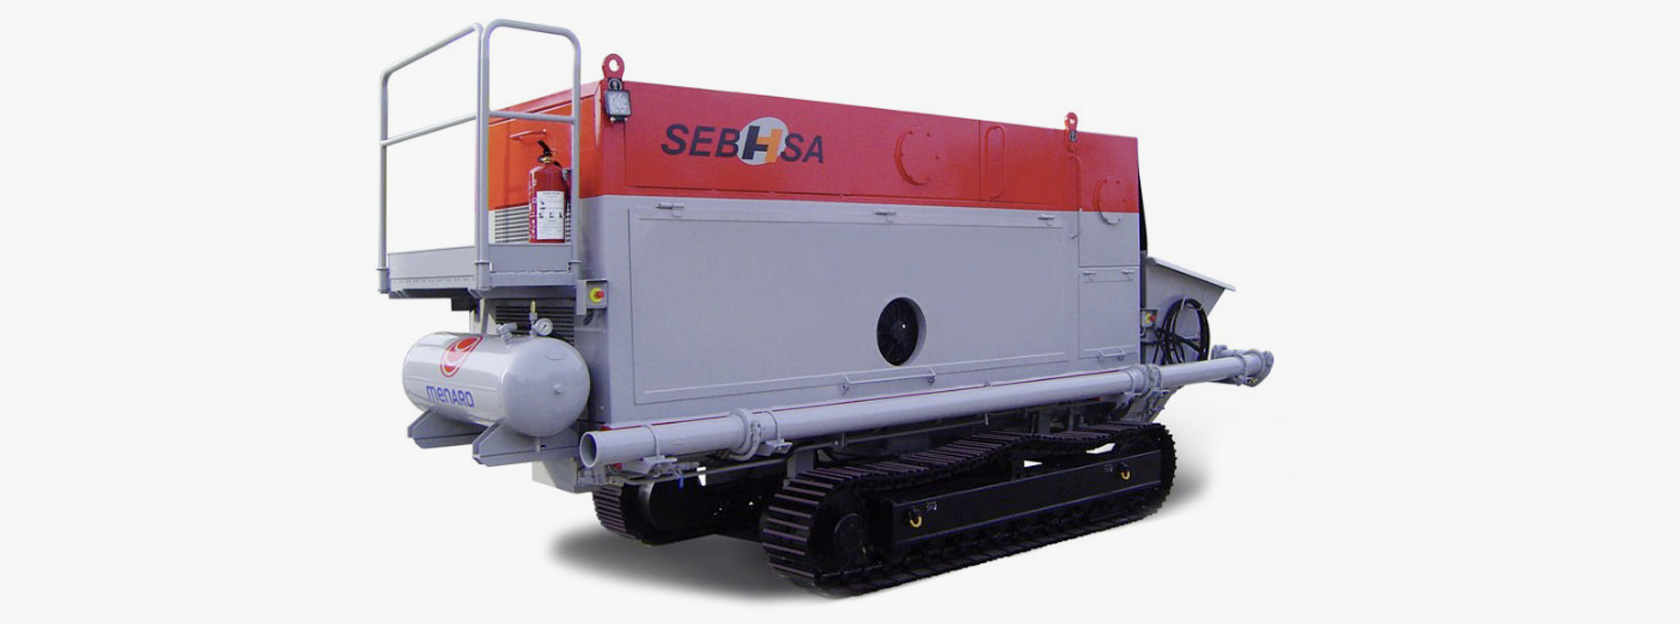 The SEBHSA BD-3907.OR Crawler-mounted concrete pump meets the highest requirements with its maximum concrete production capacity.